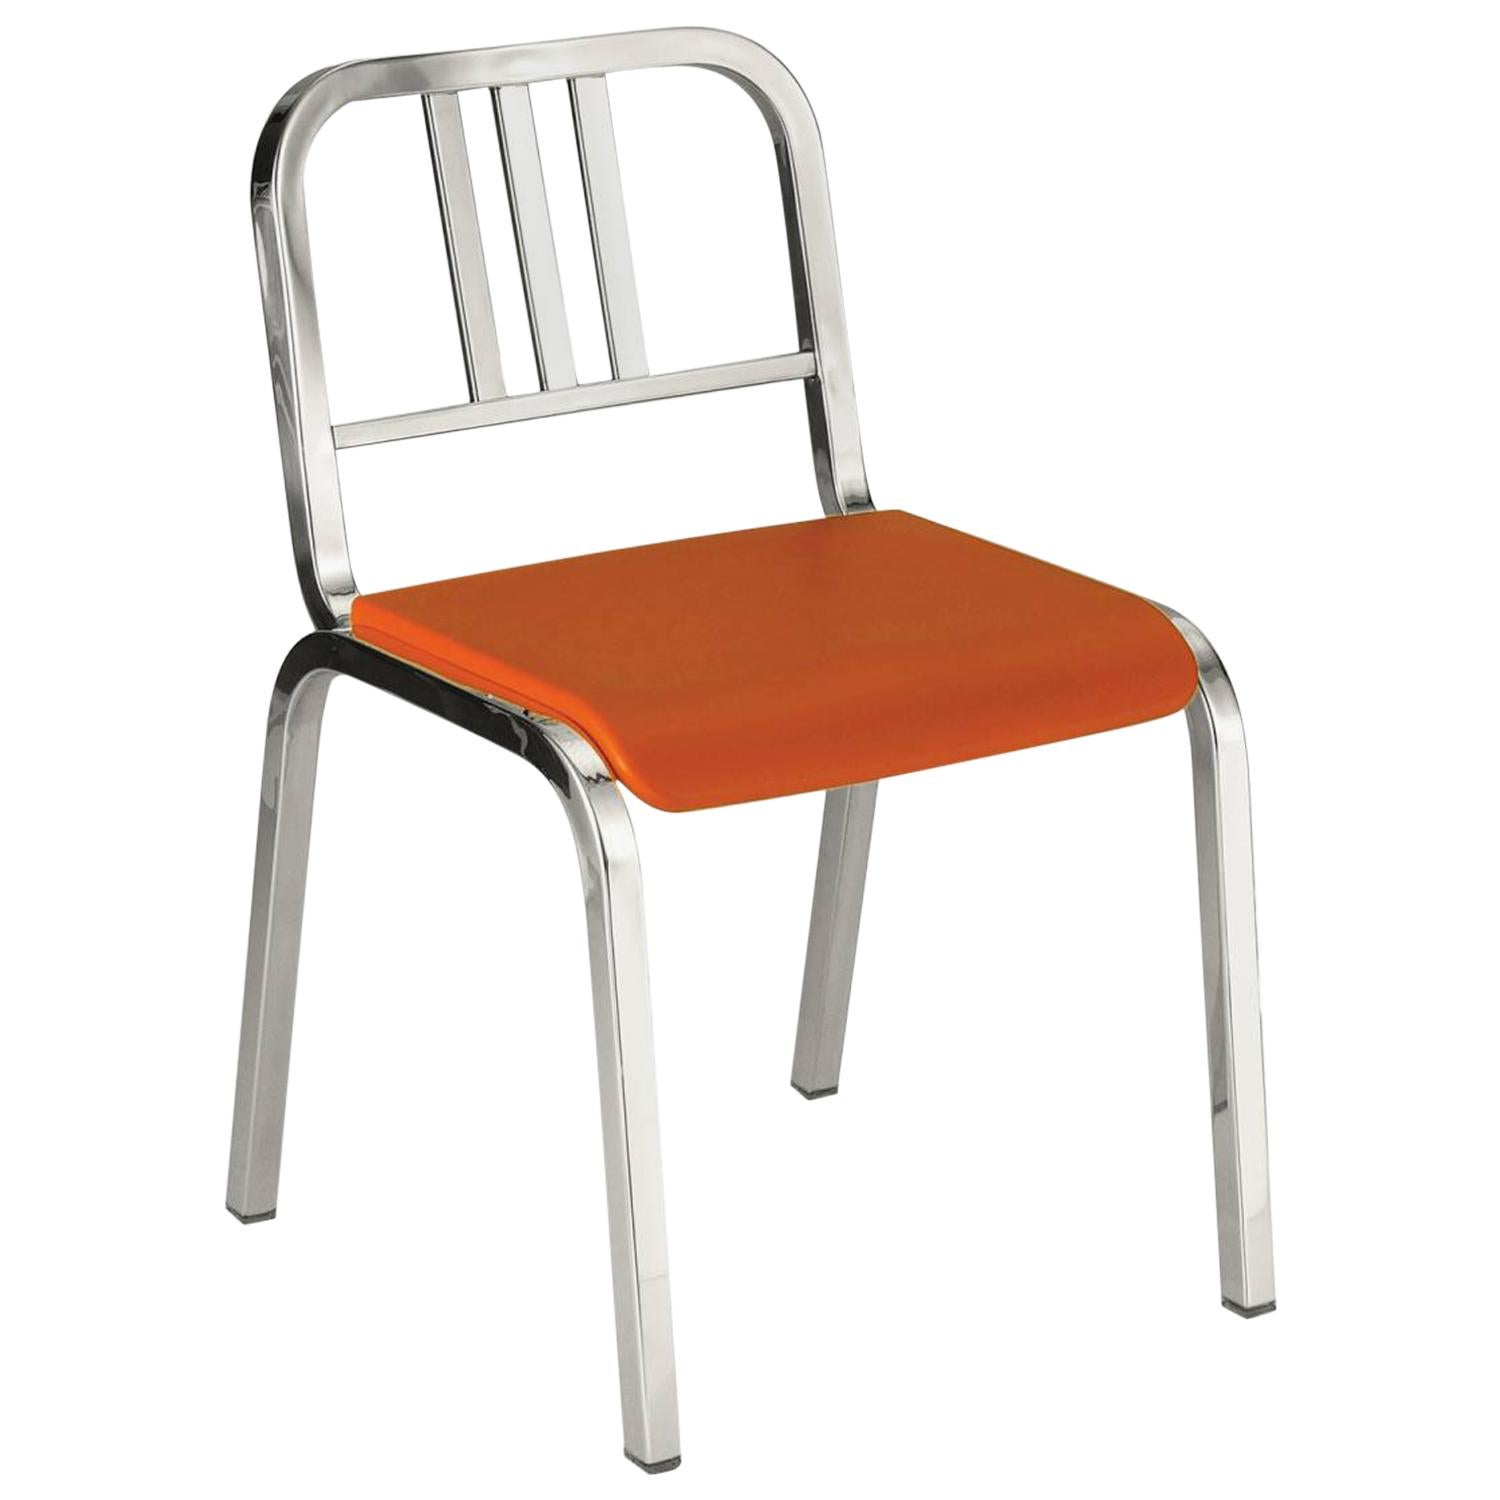 Emeco Nine-0 Chair in Polished Aluminum with Orange Seat by Ettore Sottsass